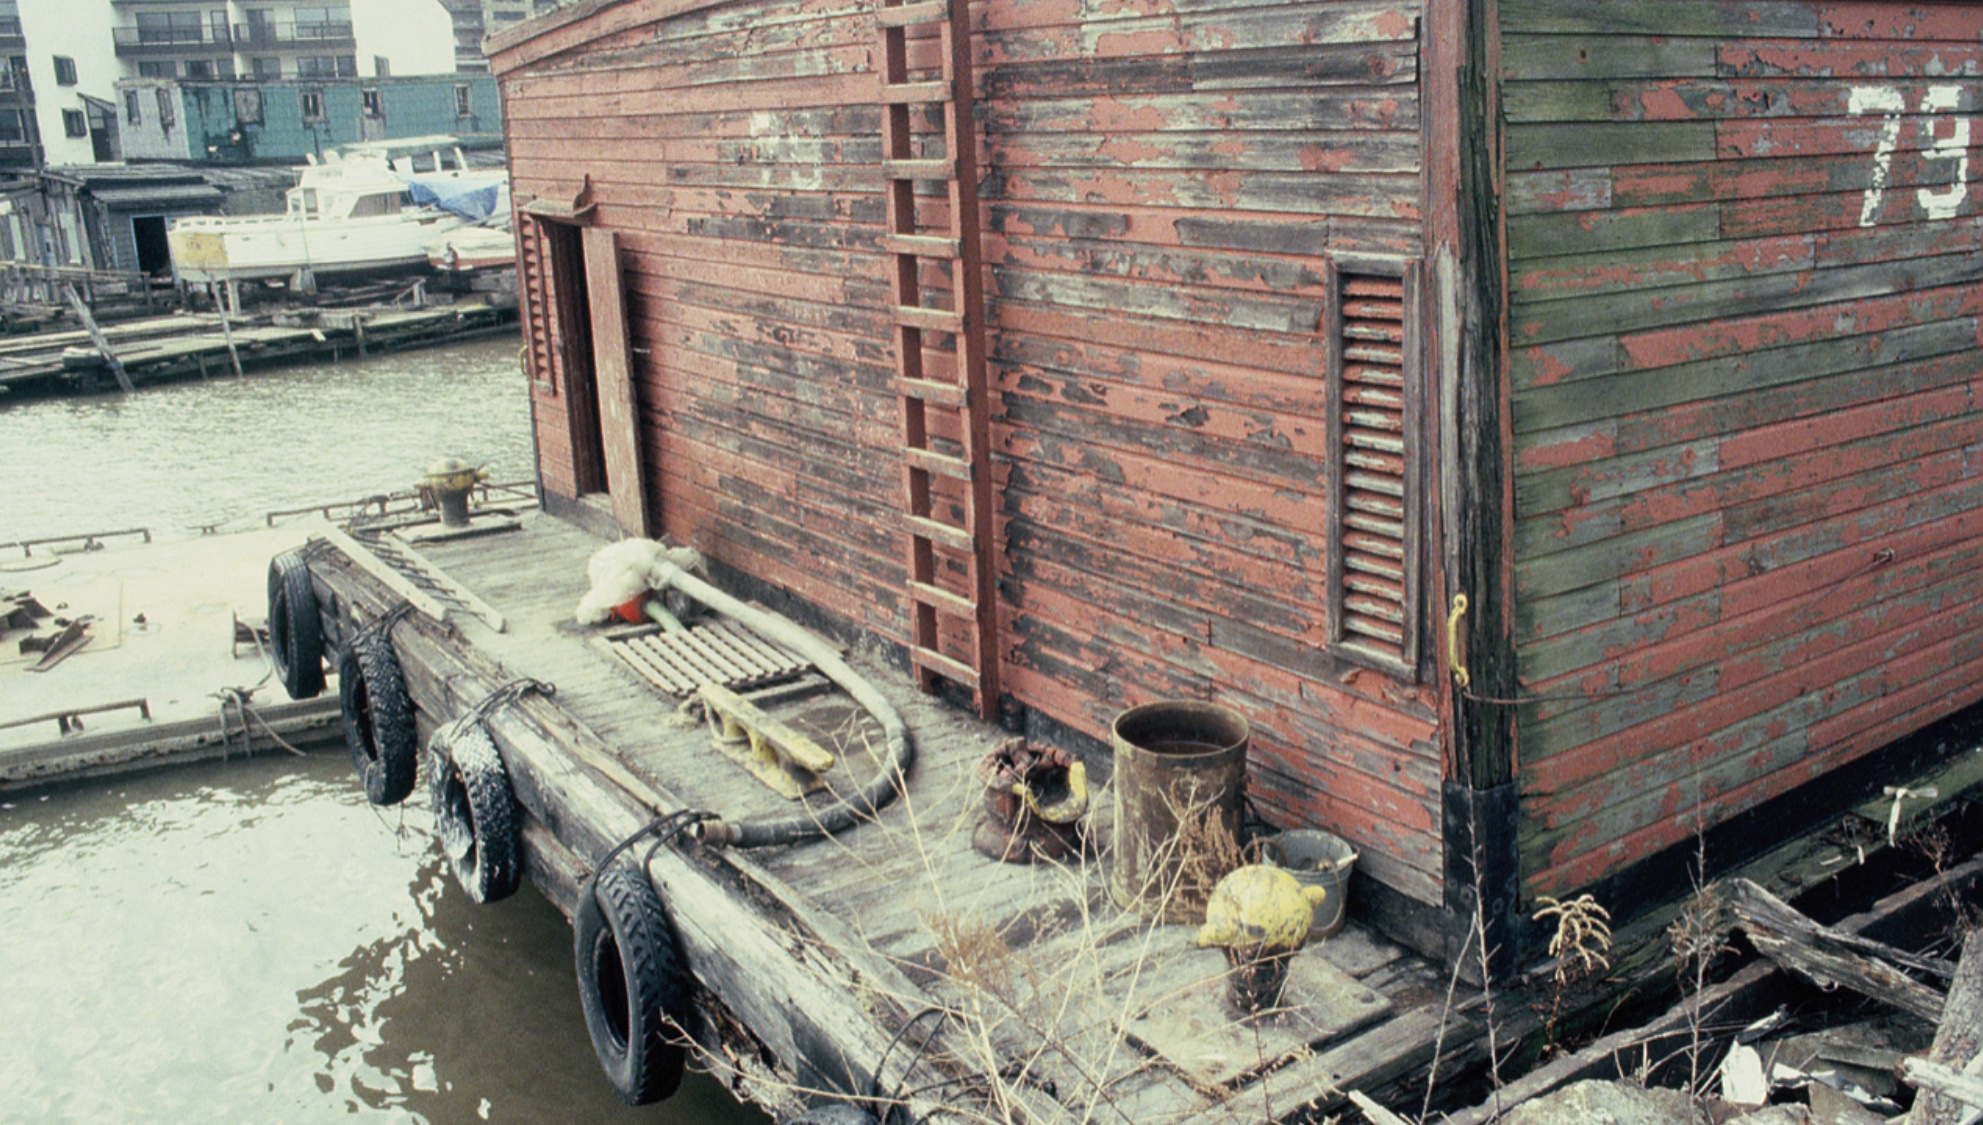 In this undated photo, fading paint makes Lehigh Valley Barge #79 look especially picturesque. Photo by David Sharps